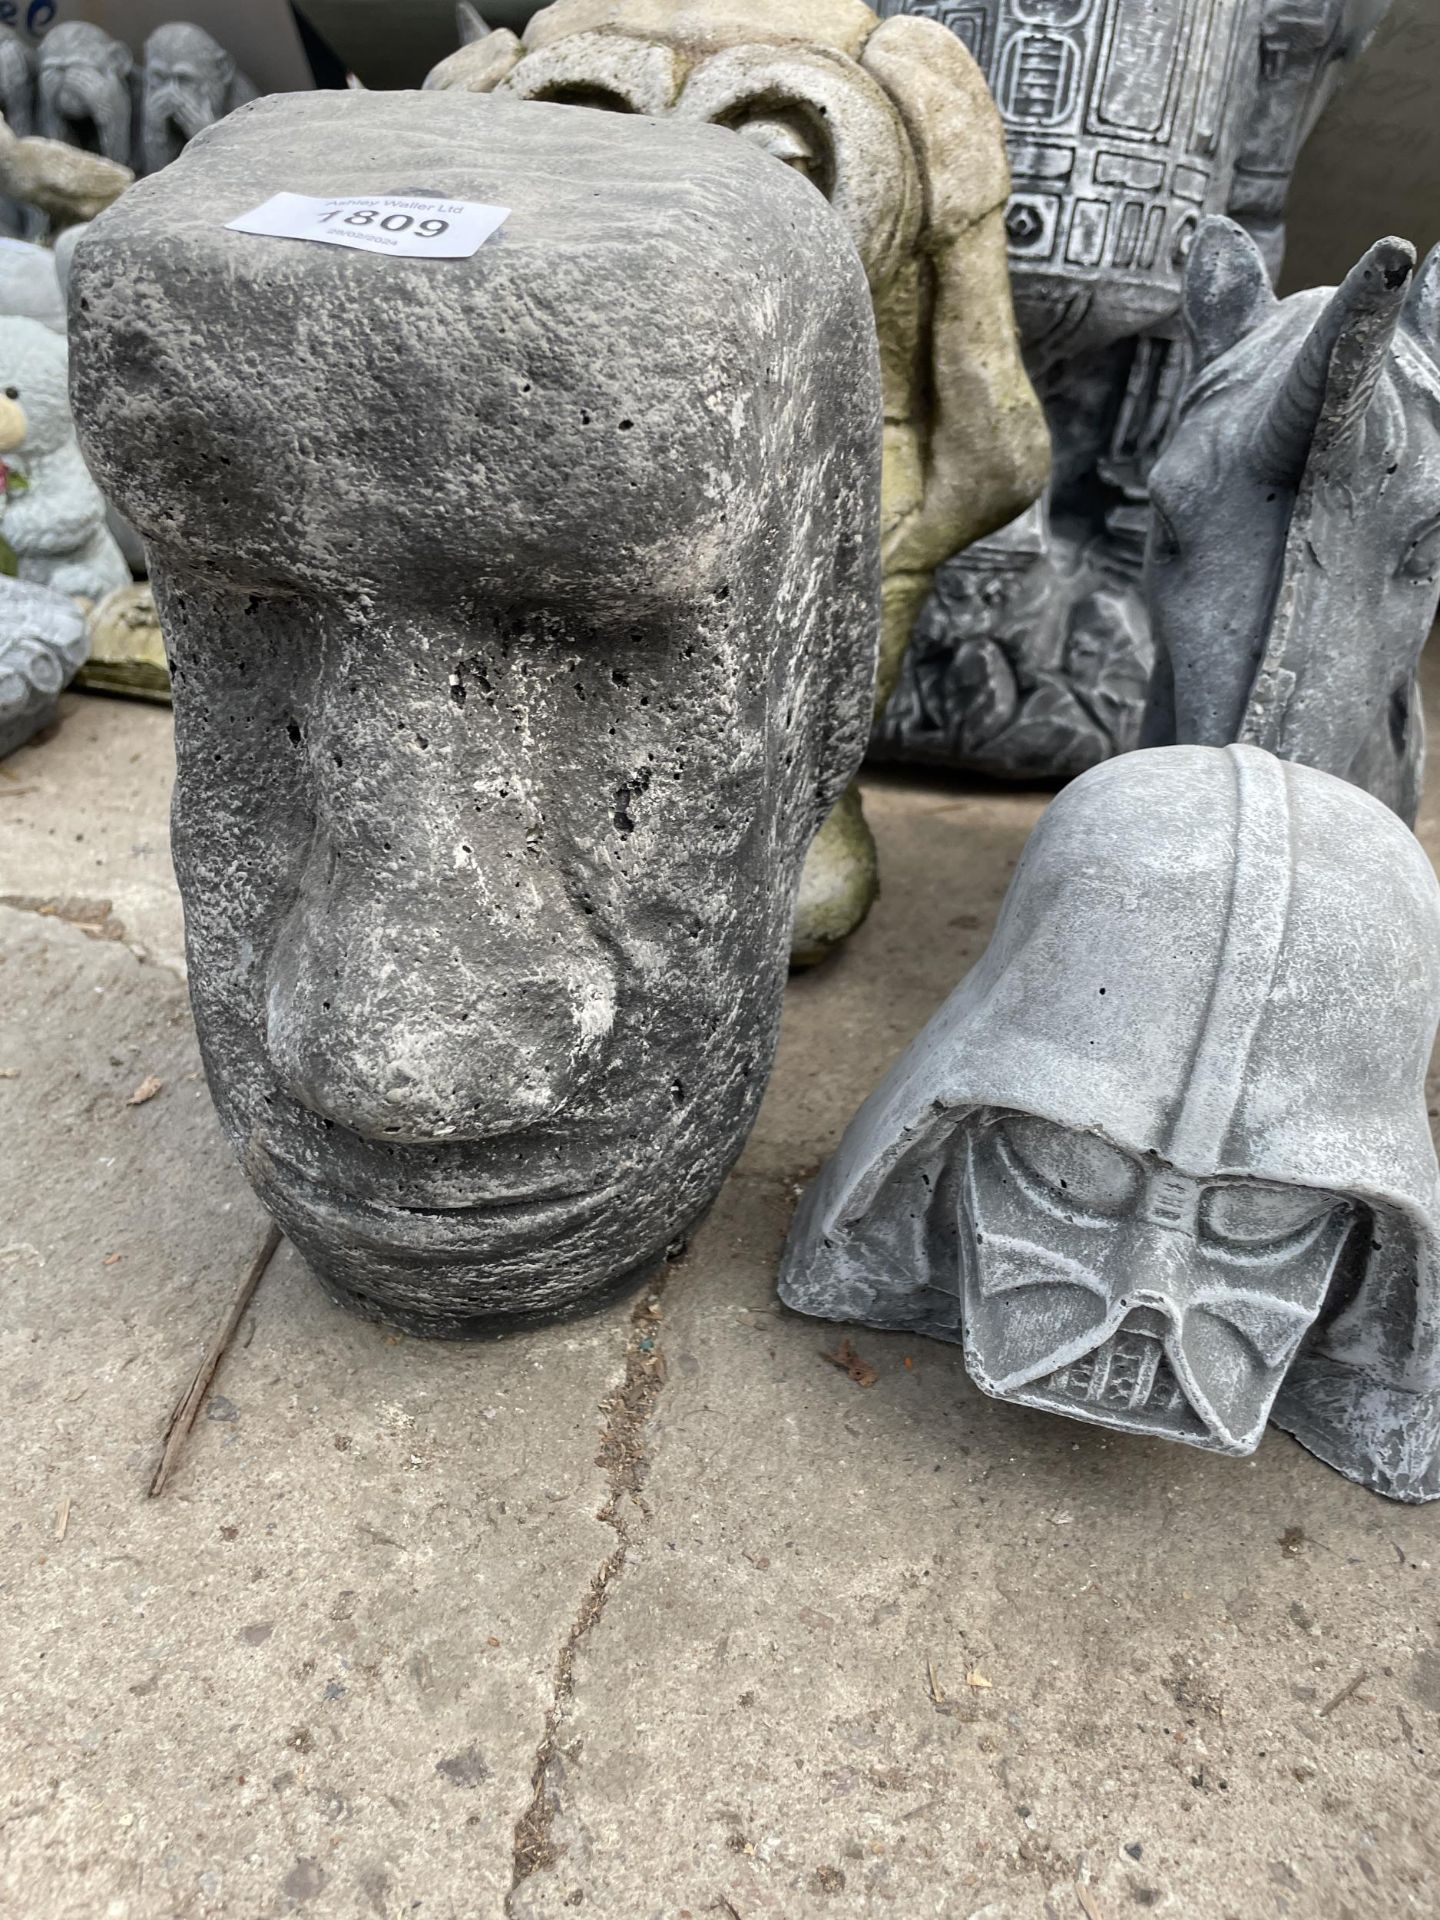 FIVE VARIOUS CONCRETE GARDEN FIGURES TO INCLUDE DARTH VADER AND A HORSE HEAD ETC - Image 2 of 3